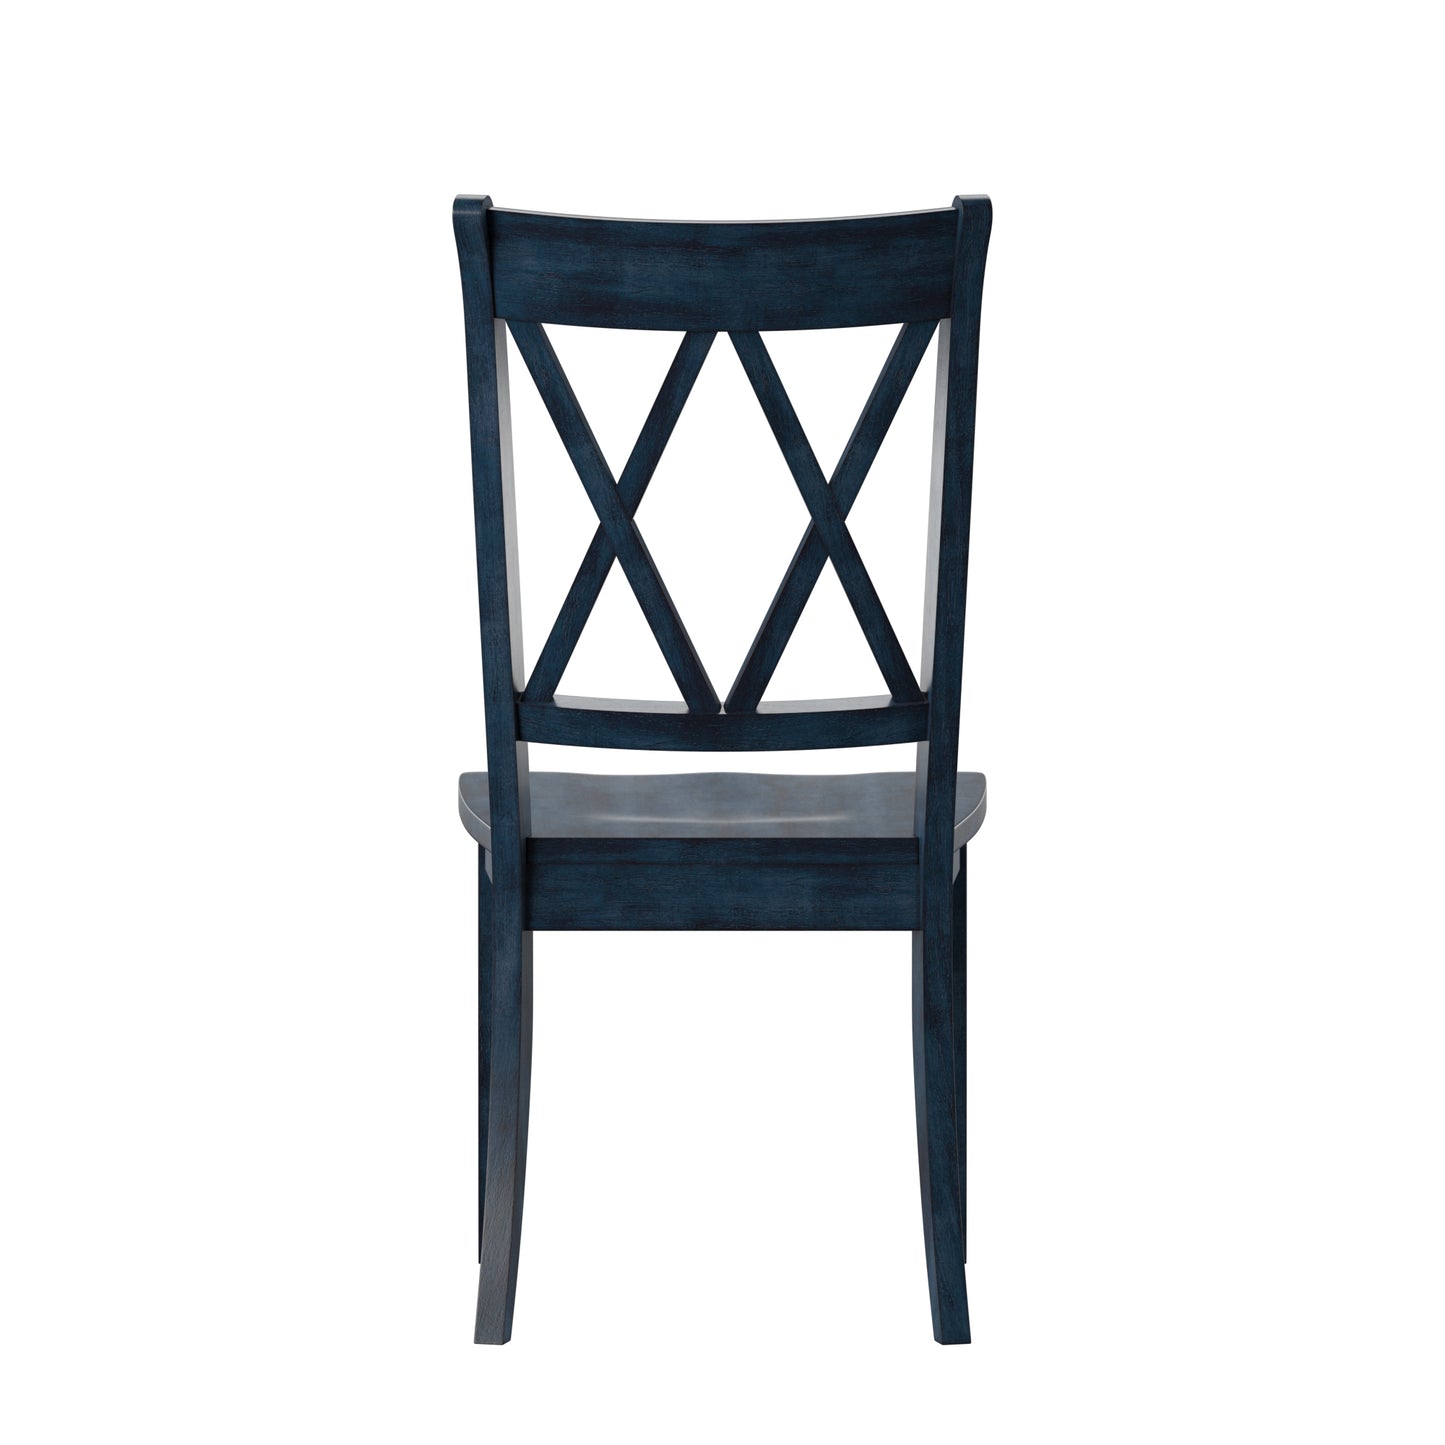 Double X Back Wood Dining Chairs (Set of 2) - Antique Dark Denim Finish